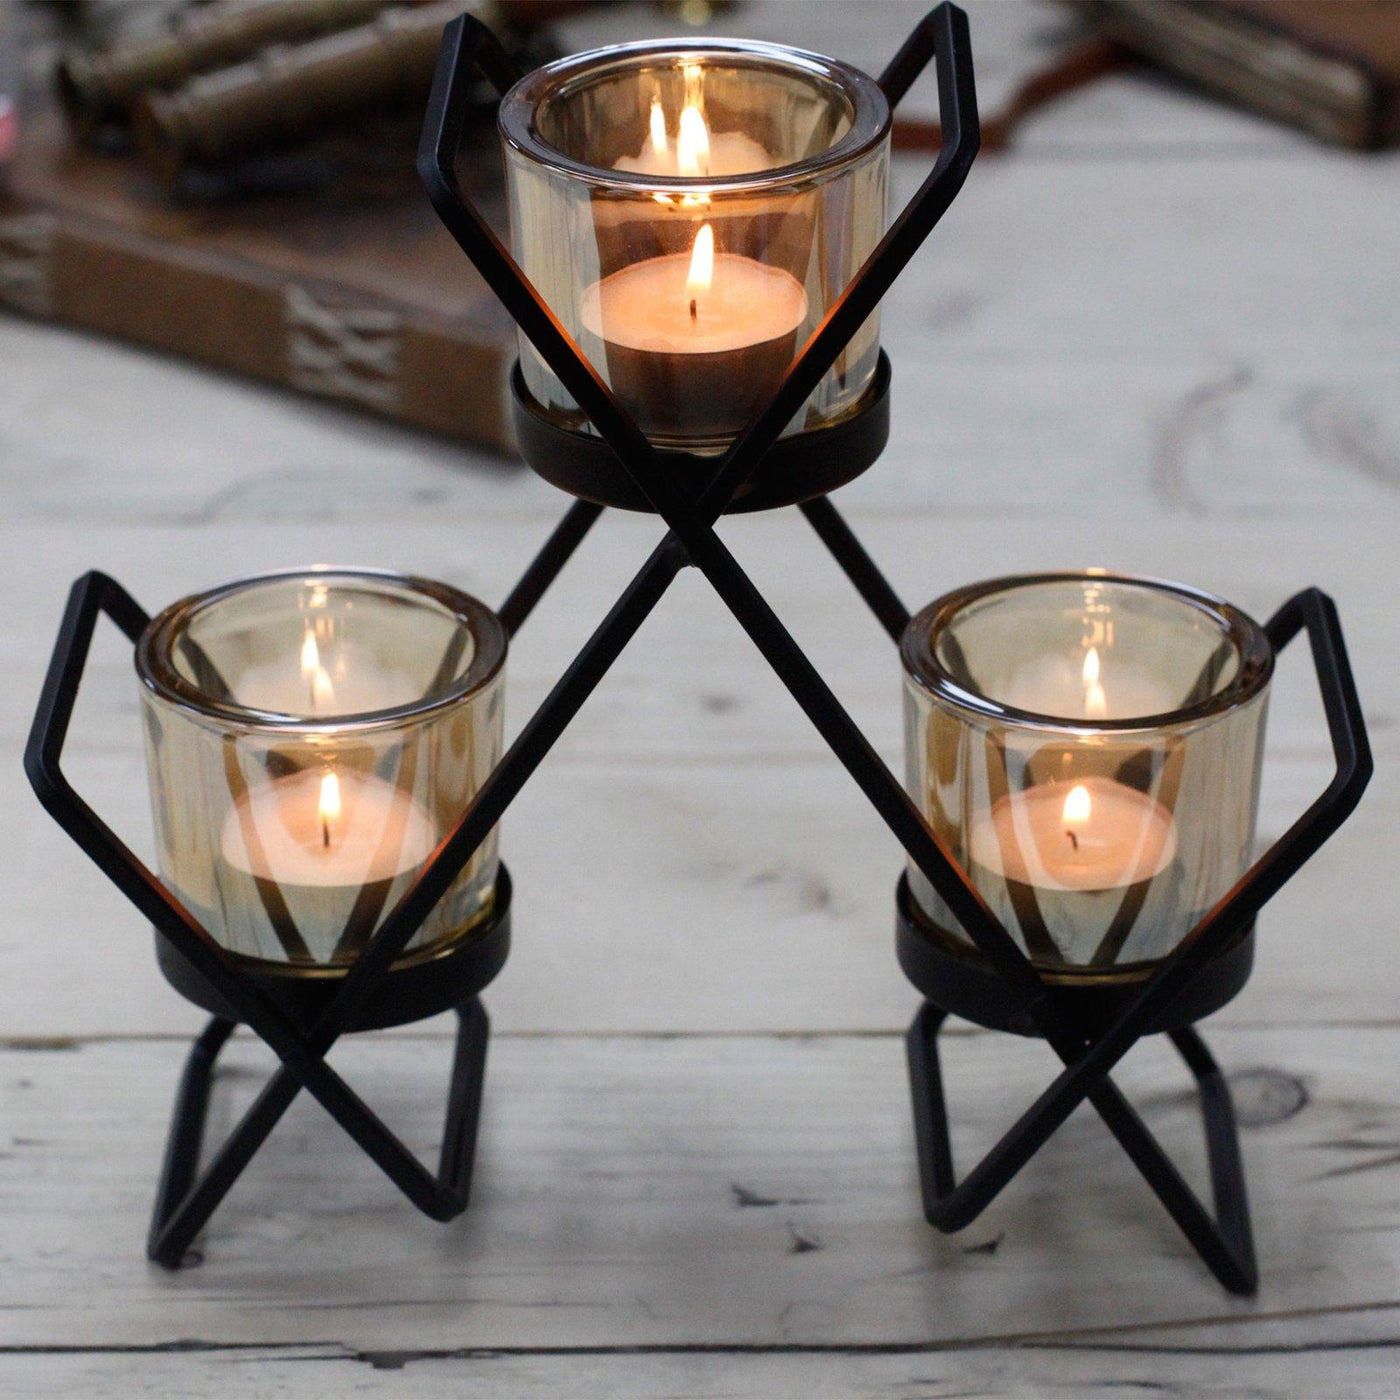 Centrepiece Triangle 3 Candles Gold Amber Glass And Iron Votive Tea Light Candle Holder.